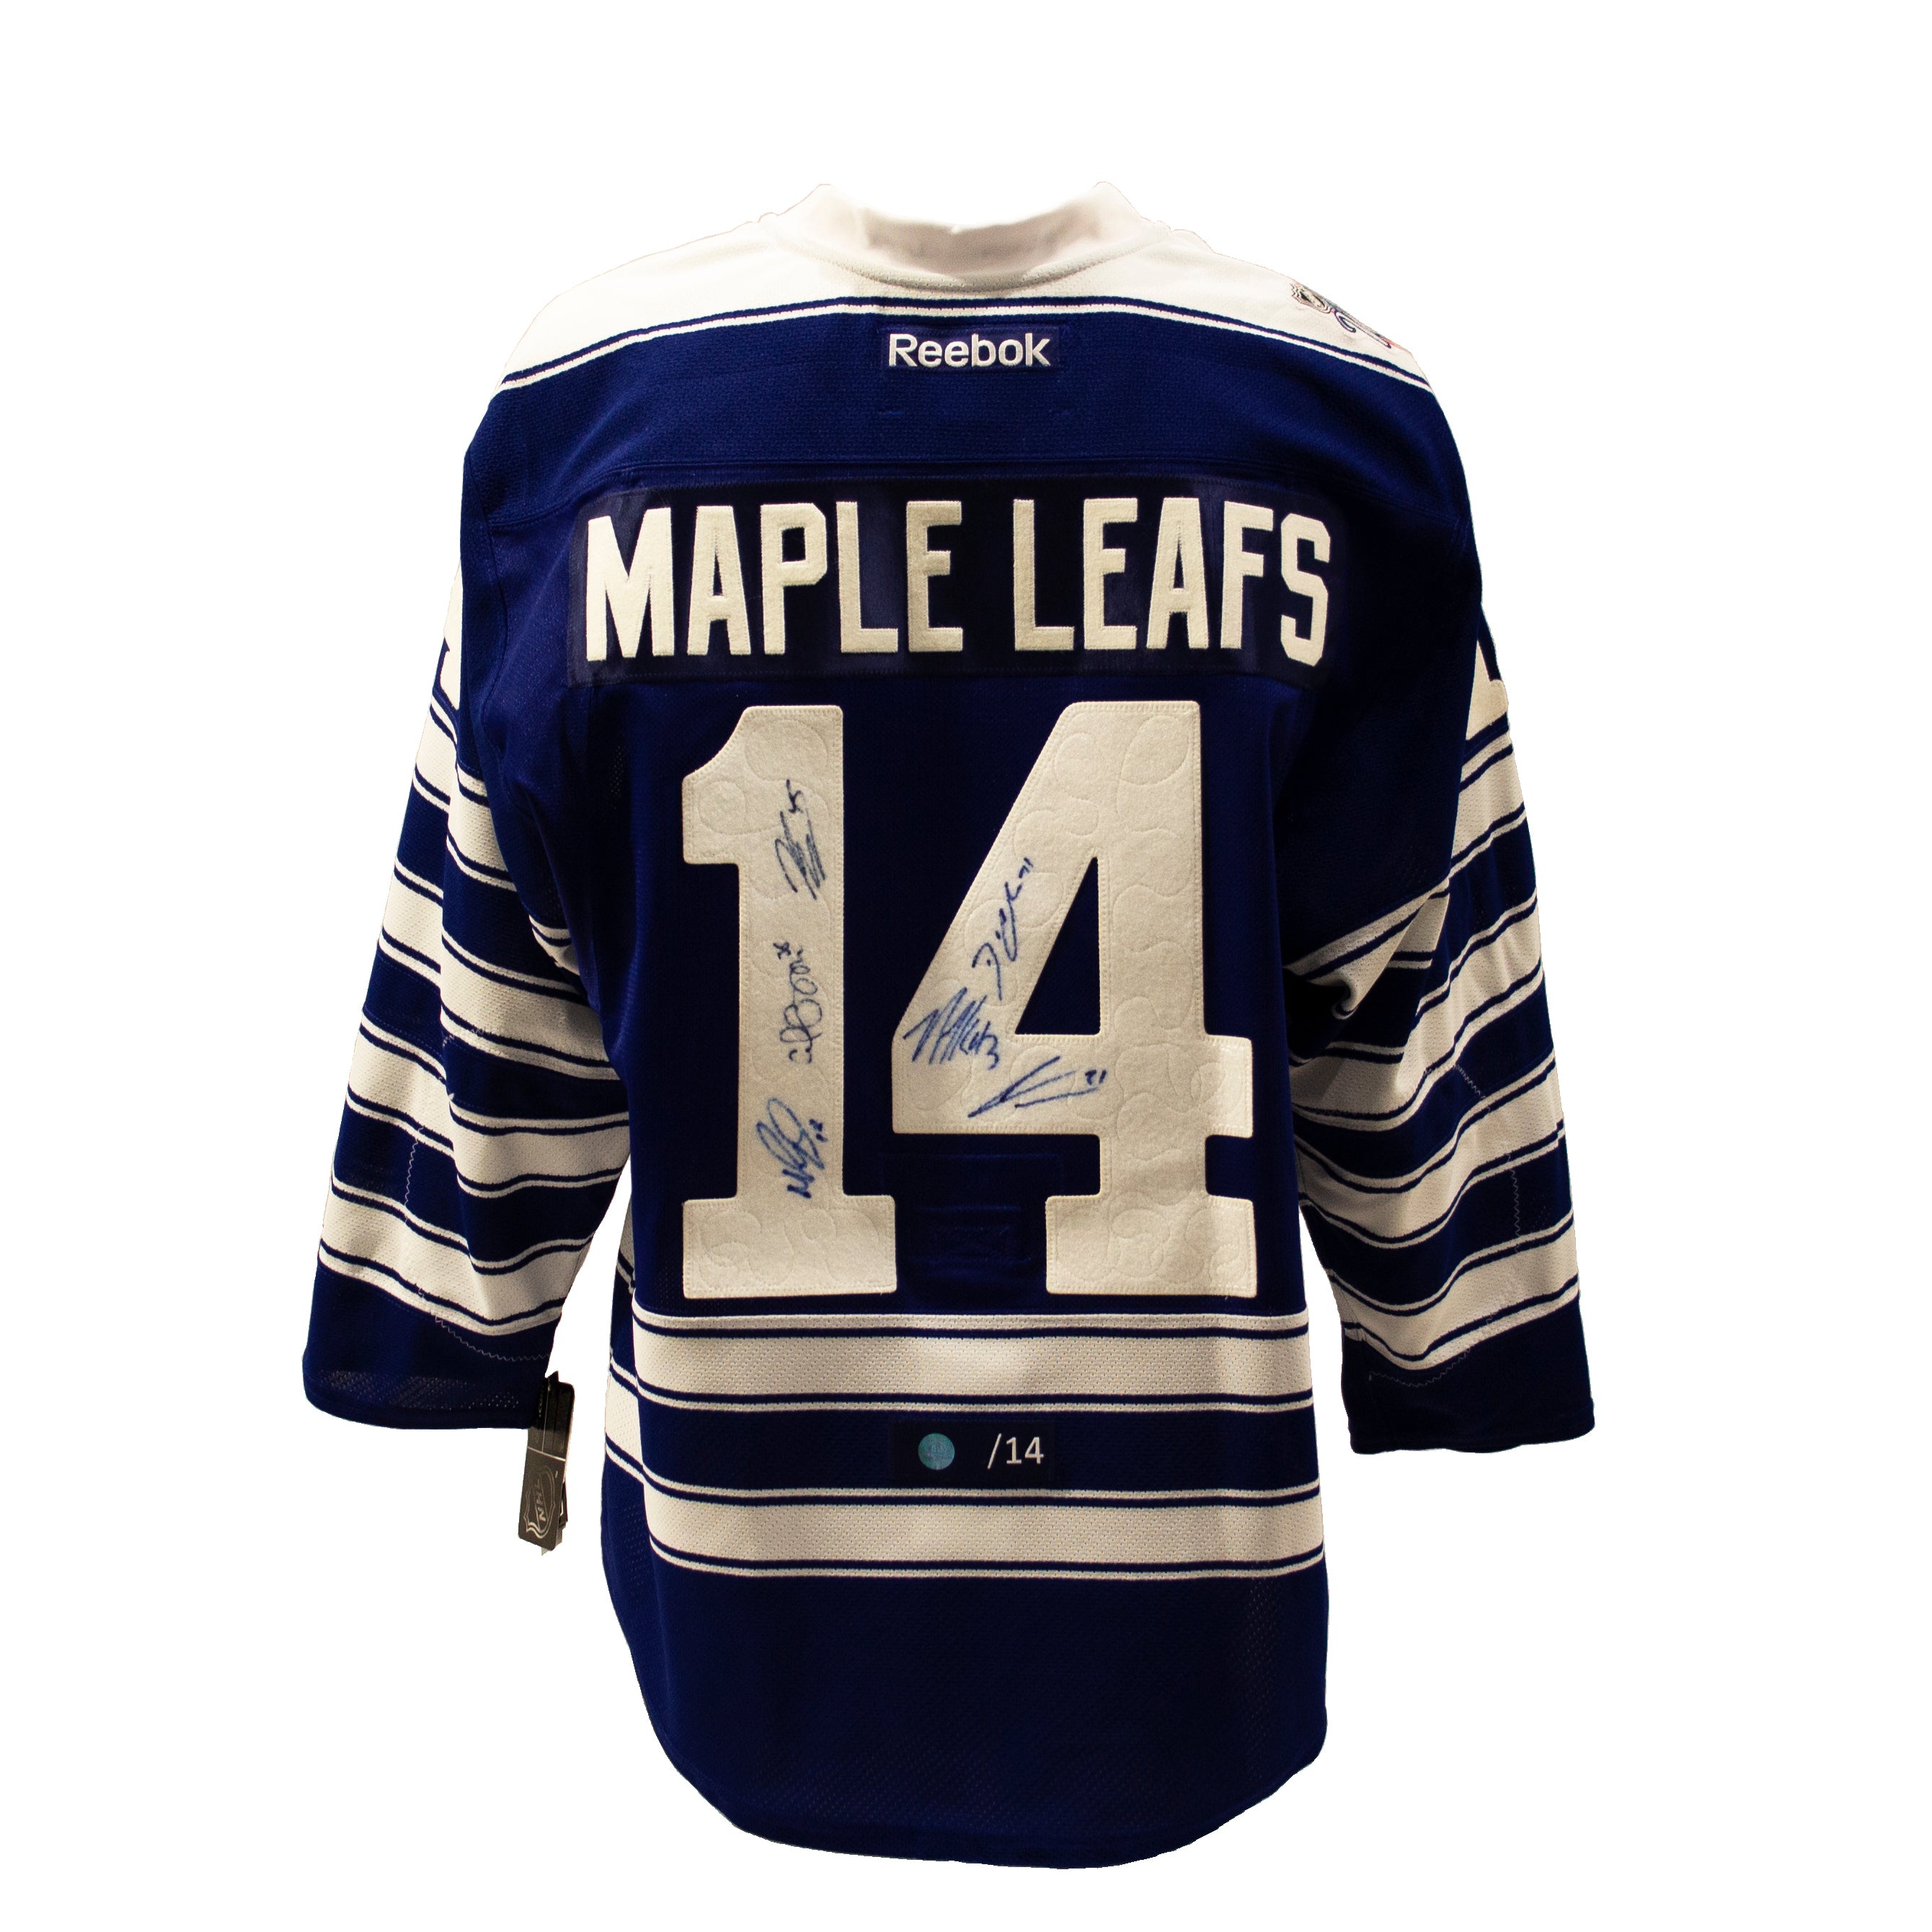 2014 Toronto Maple Leafs Winter Classic 6 Player Signed Authentic Reebok Jersey